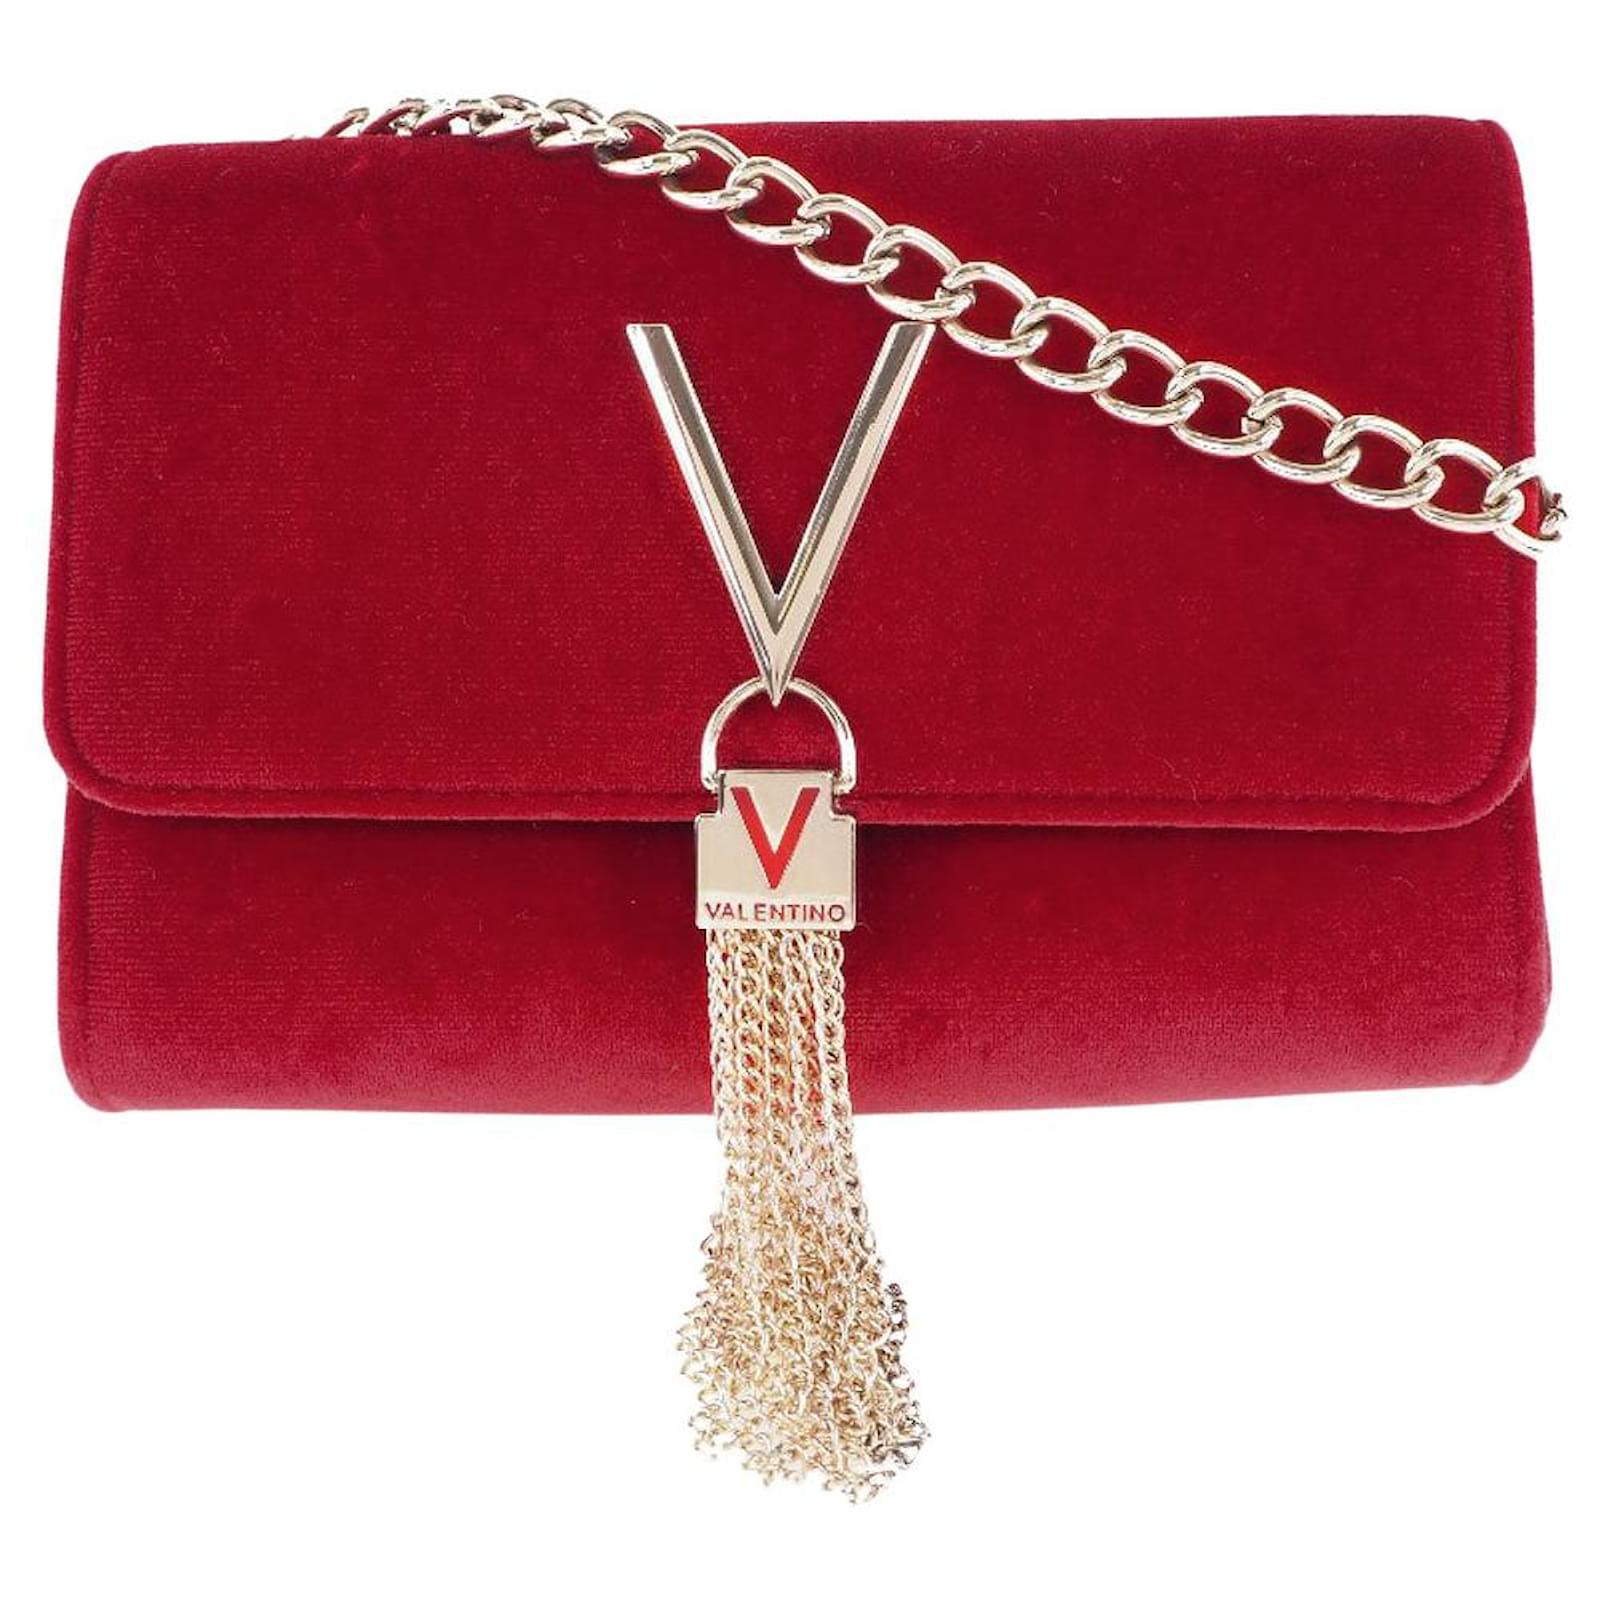 Valentino Bags Marilyn bag in red